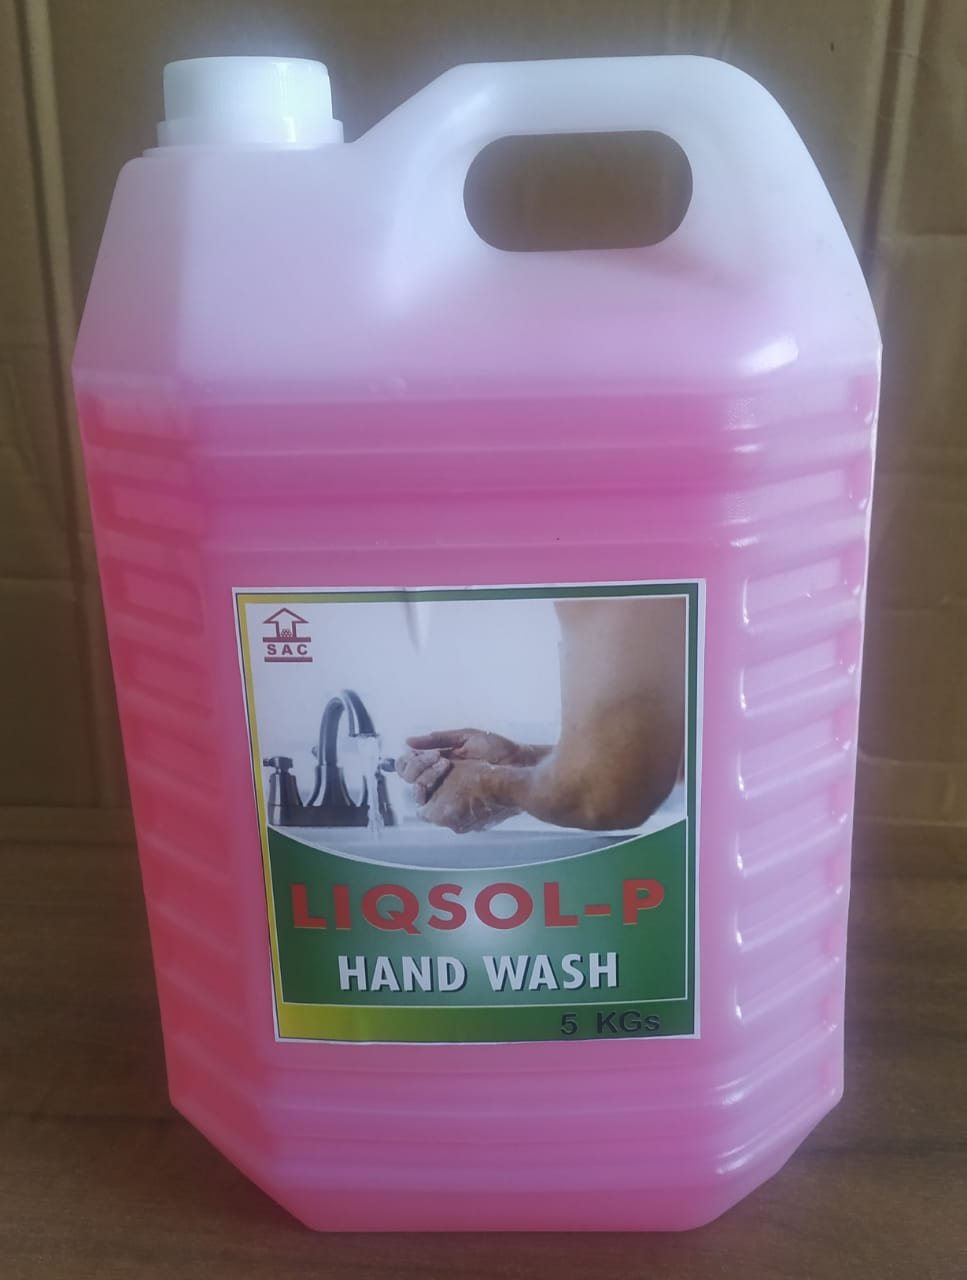 OM SAI ENTERPRISES ! Housekeeping Products Dealer ! Wholesaller ! Cleaning Chemical ! Safety Material !